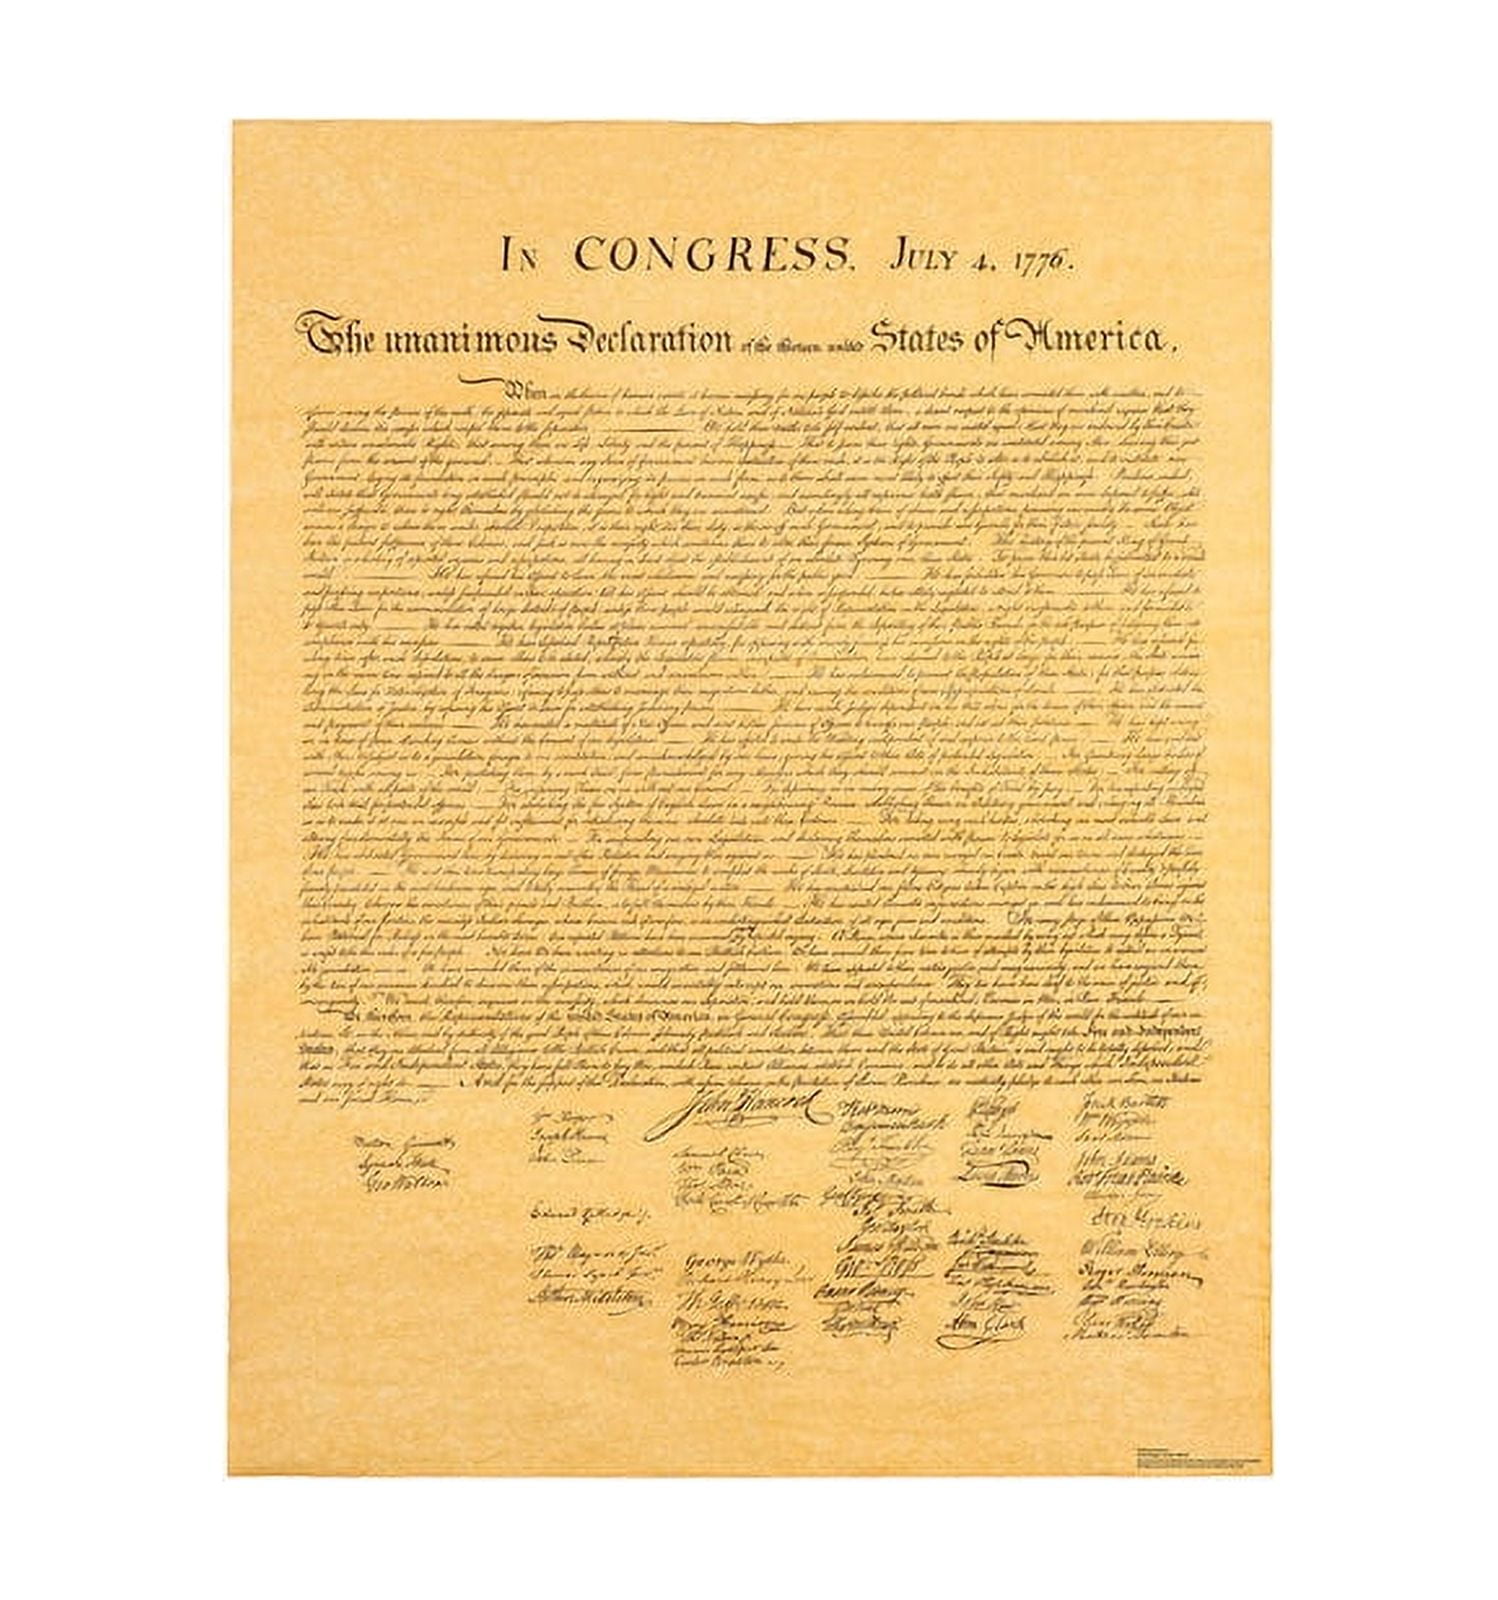 UPC 082033025458 product image for 2545 58 x 45 in. Declaration of Independence Cardboard Standup | upcitemdb.com